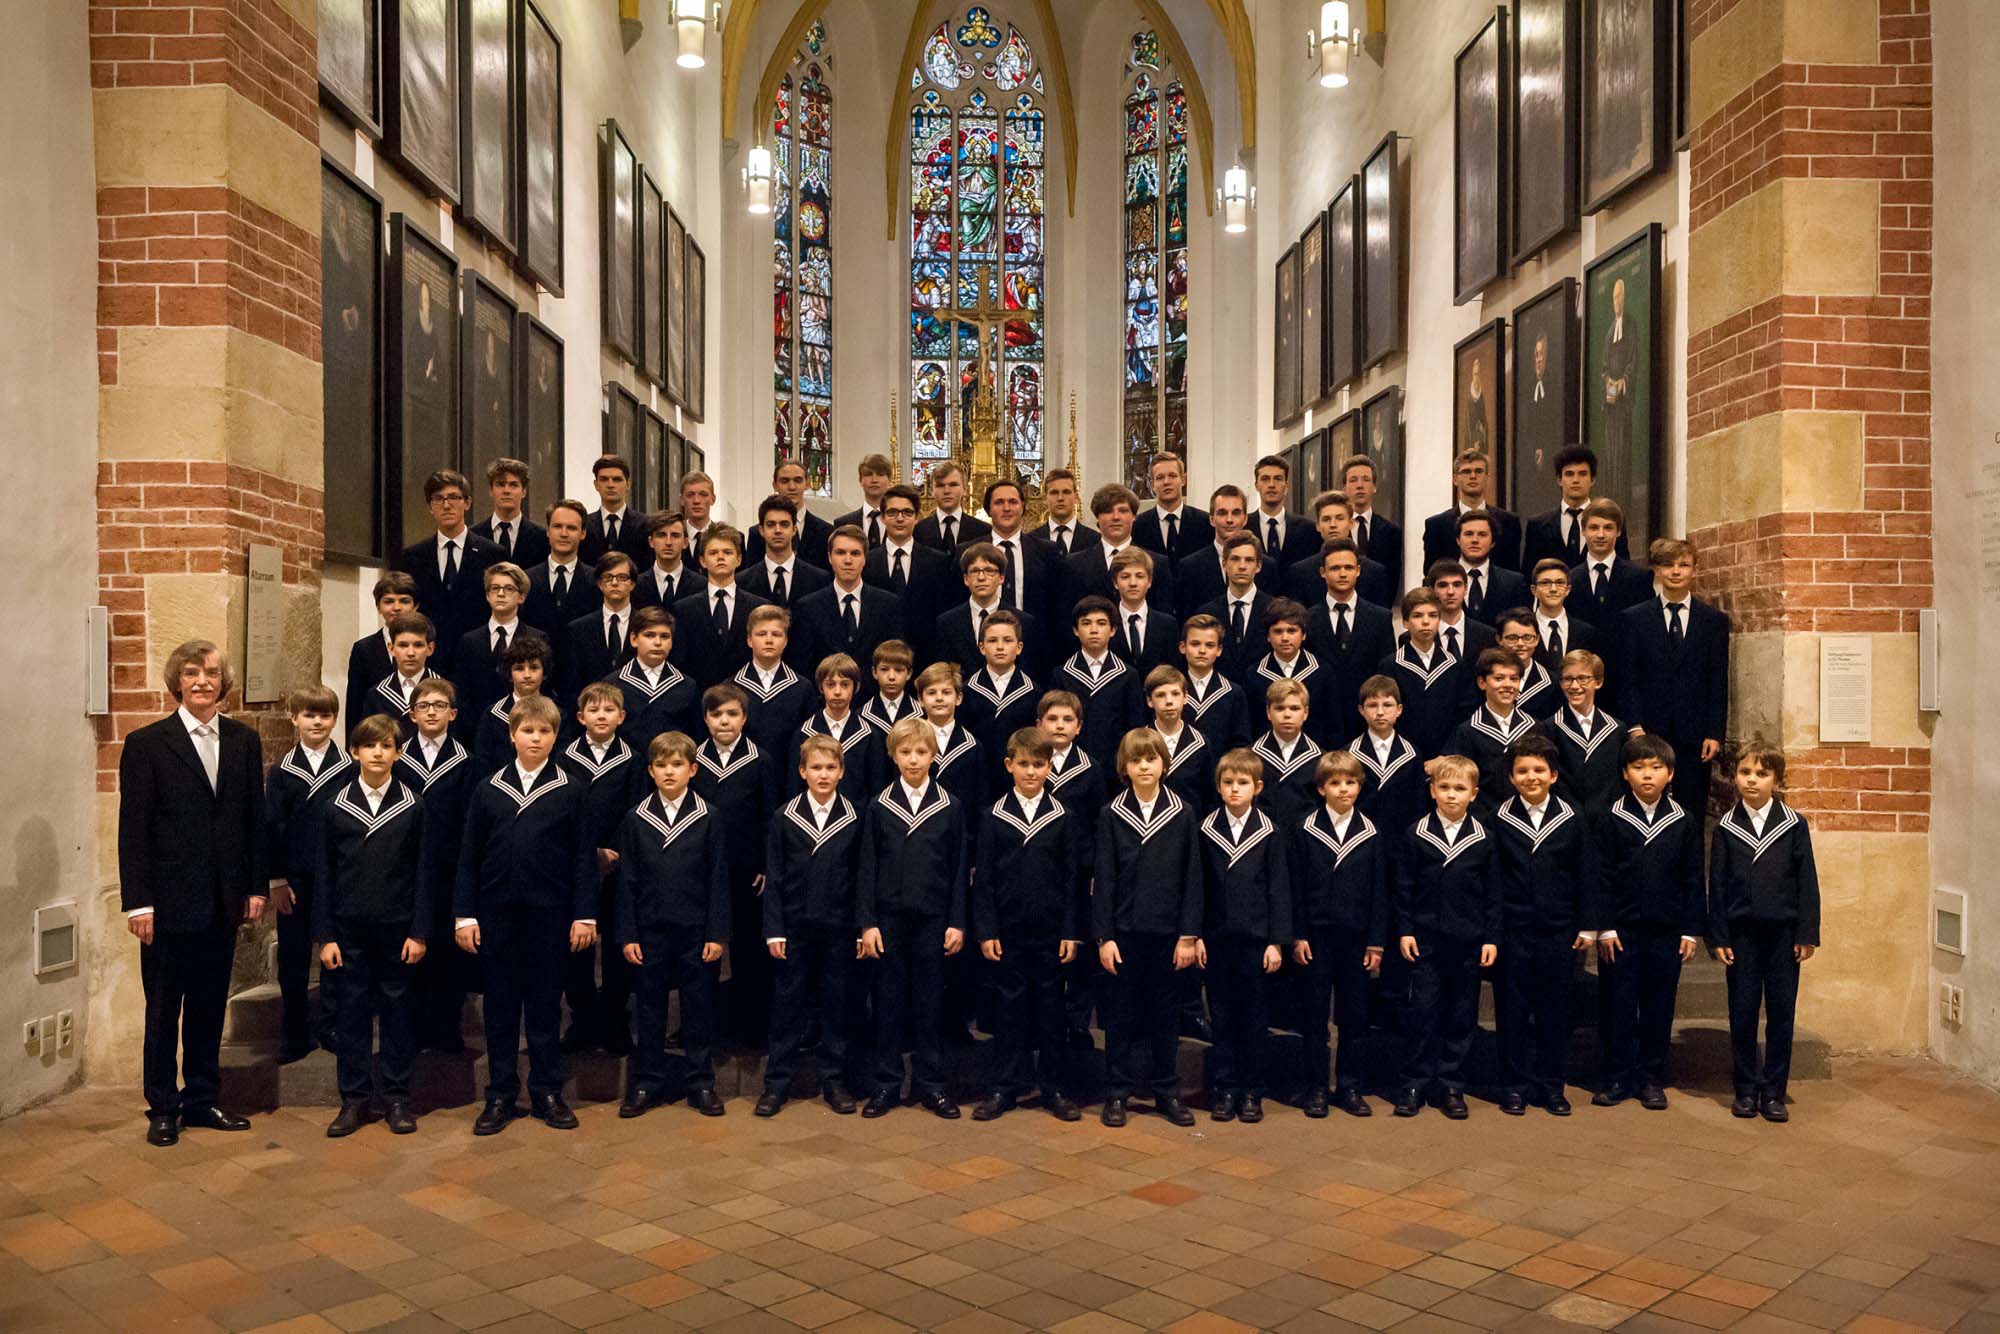 A picture of the Thomanerchor in the Thomas Kirche, with the previous Thomaskantor, Gotthold Schwarz, appointed in 2016. On September 11, 2021, the new Thomaskantor, Andreas Reize, was appointed.